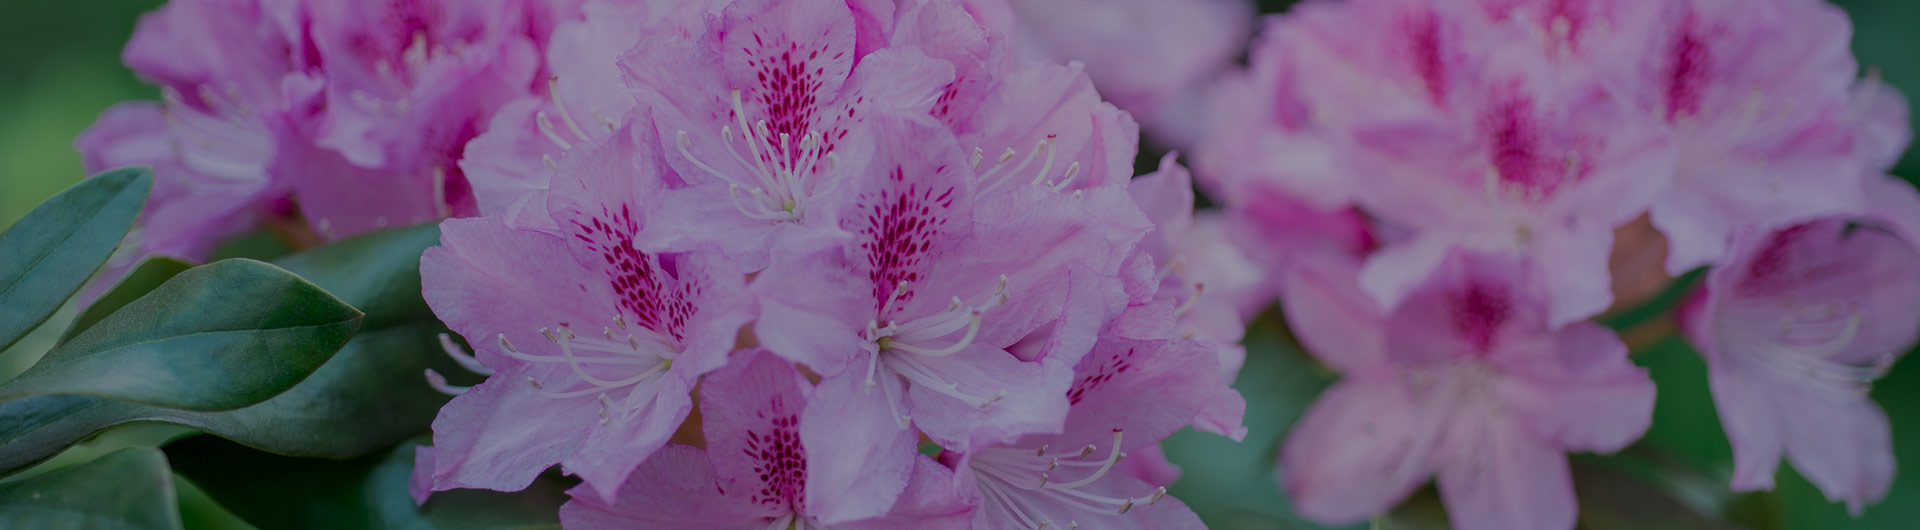 Rhododendron flowers, West Virginia's state flower.